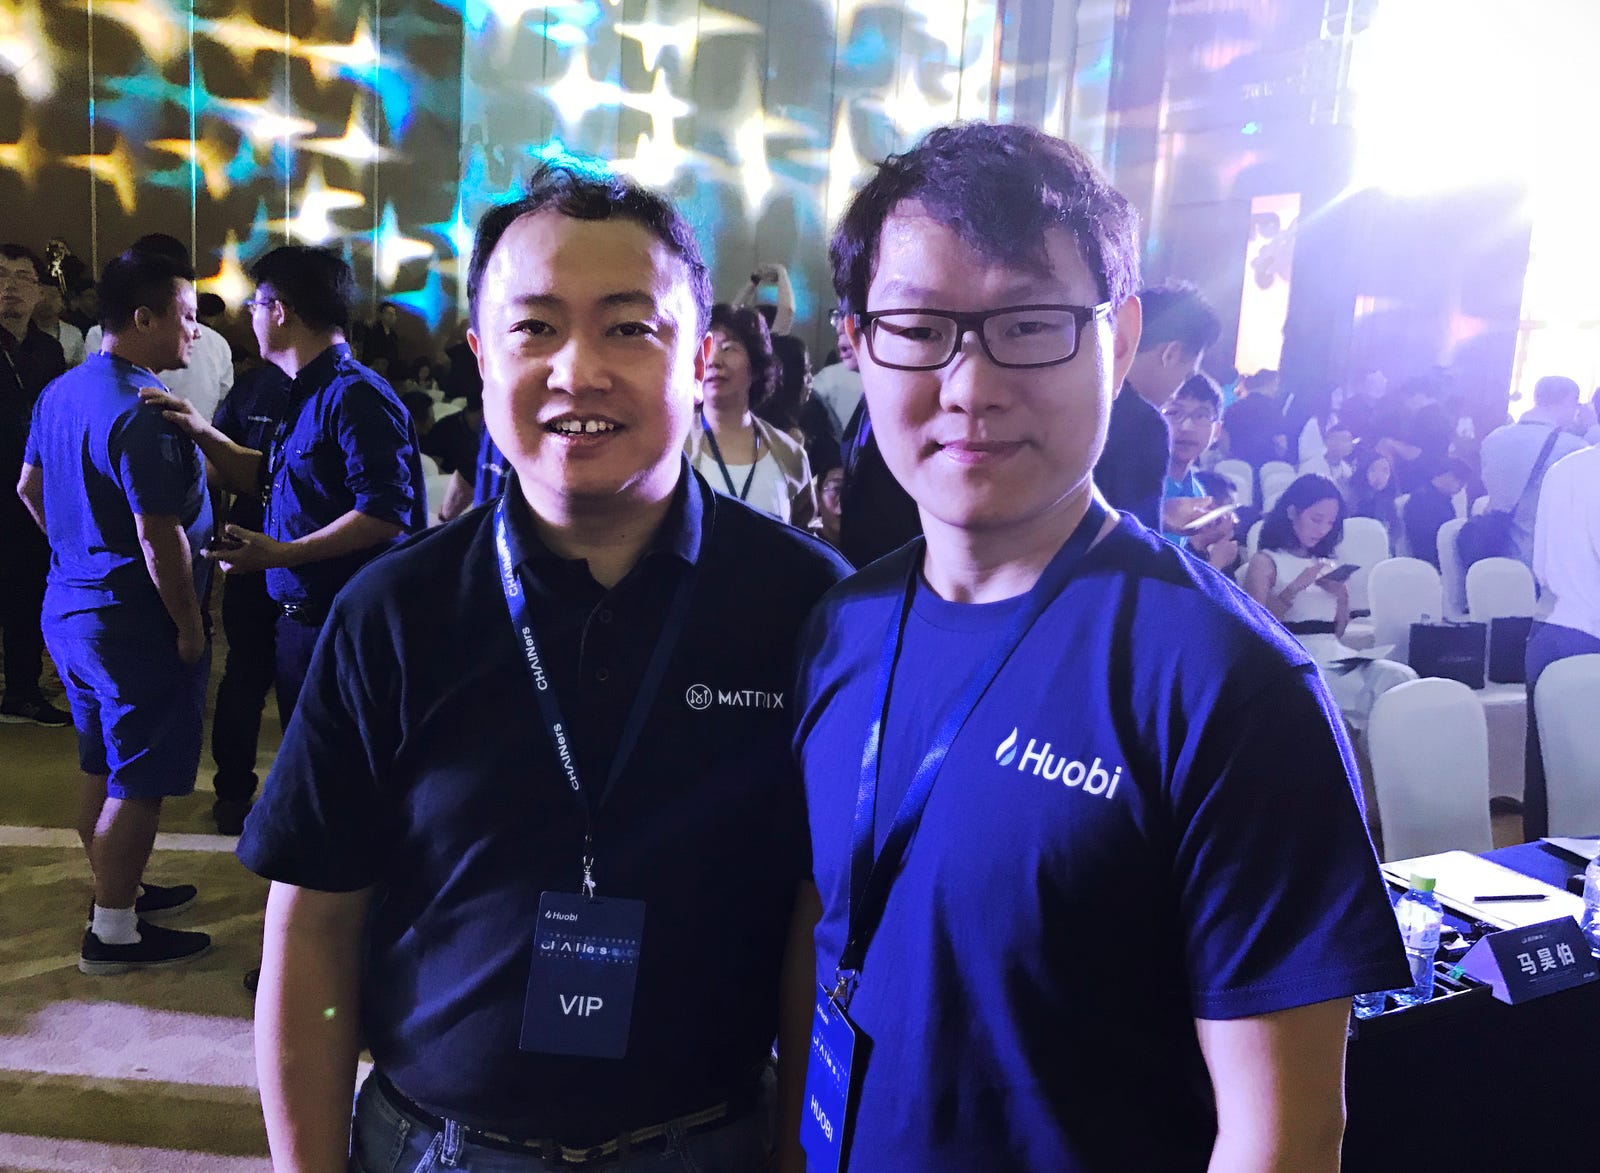 Owen Tao, CEO of MATRIX, was invited to participate in the ...